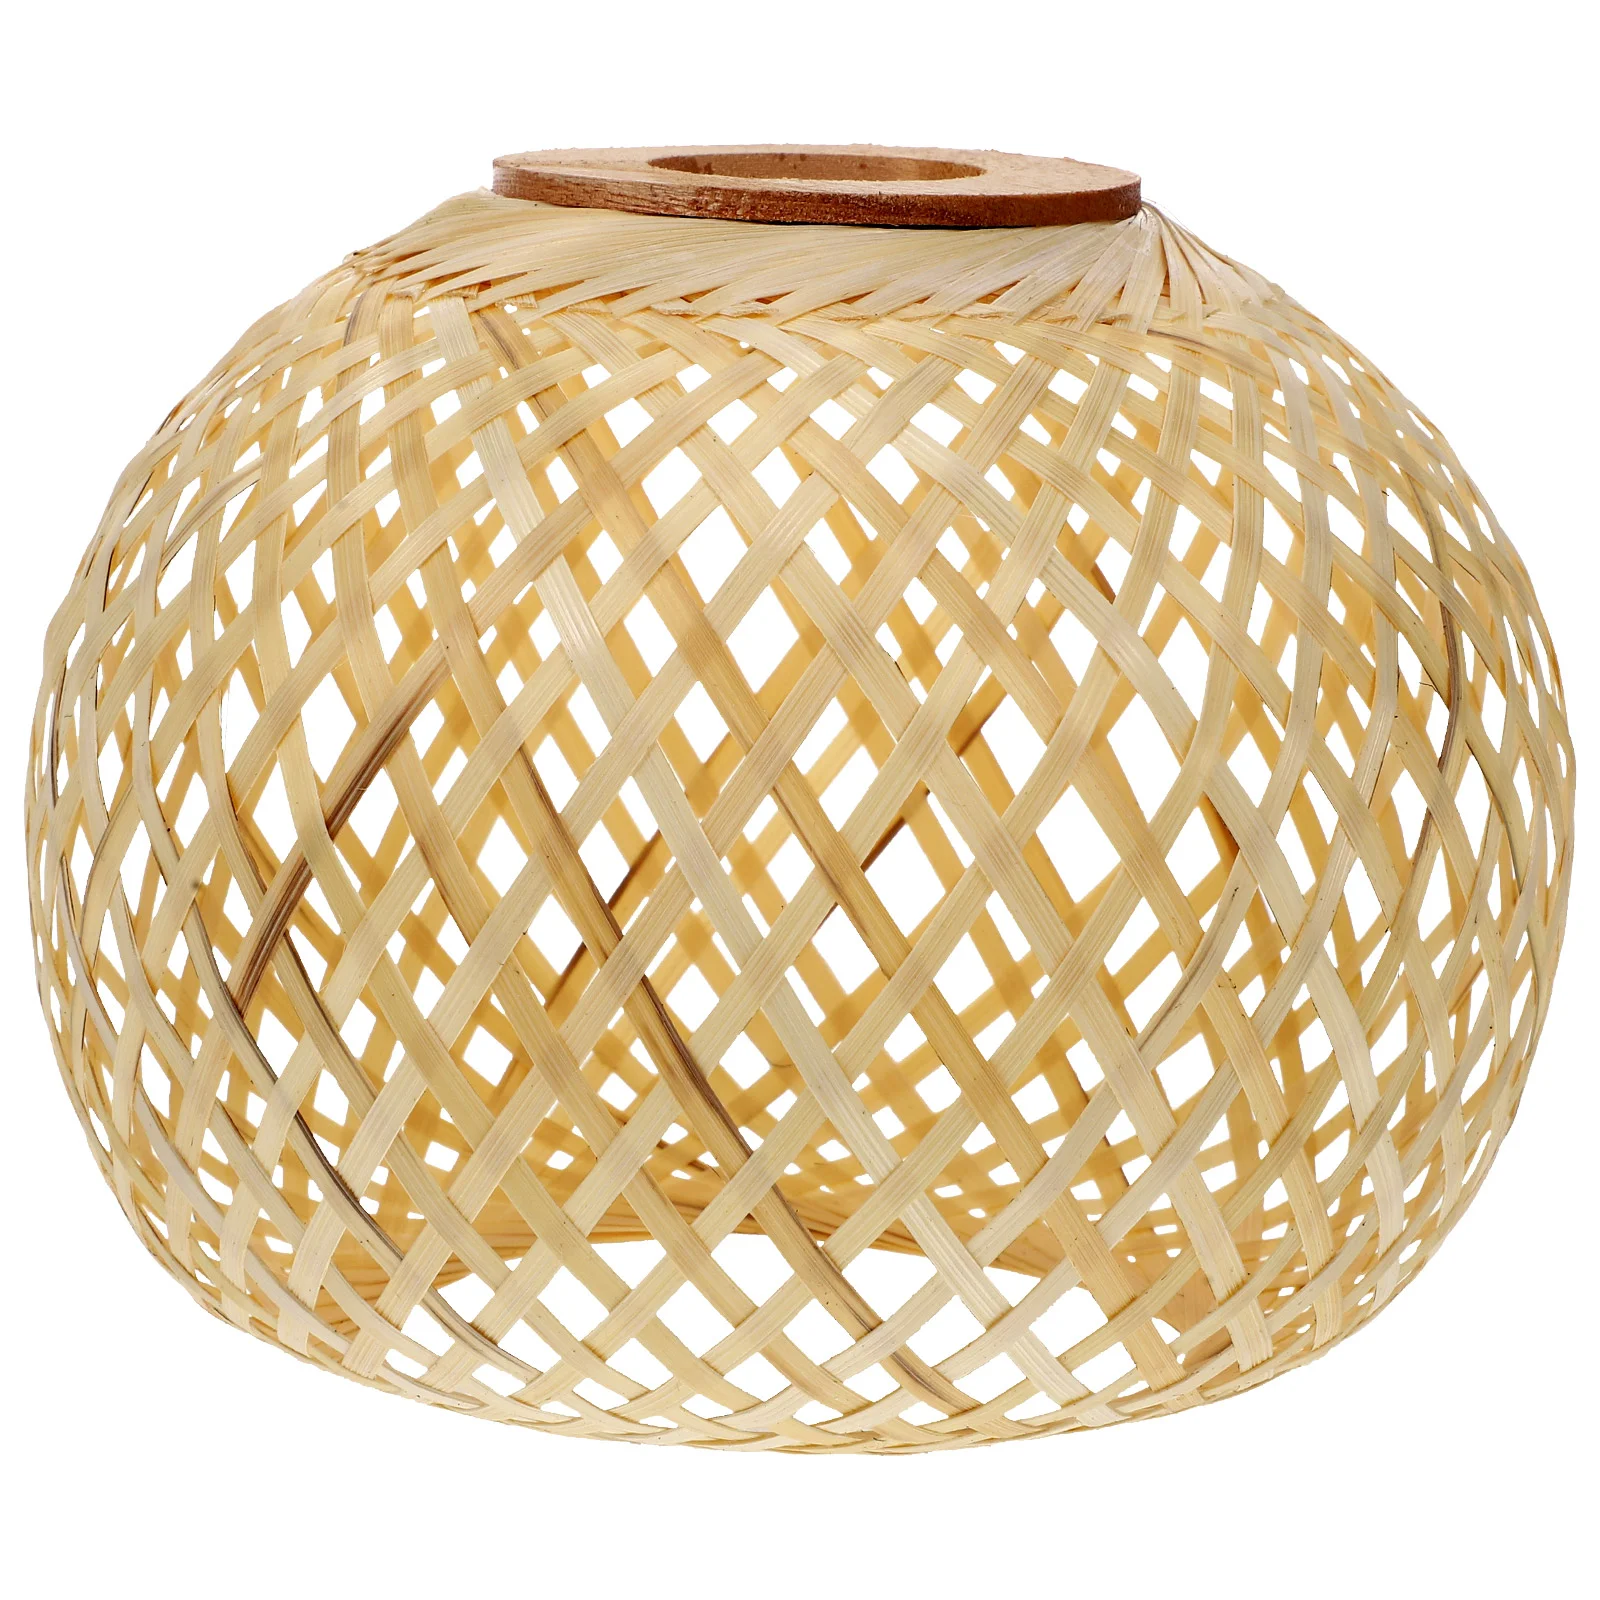 

Rattan Pendant Light Light Shades Pendant Bamboo Woven Lampshade Ceiling Hanging Rattan Wicker Rustic Chandelier Lampshades